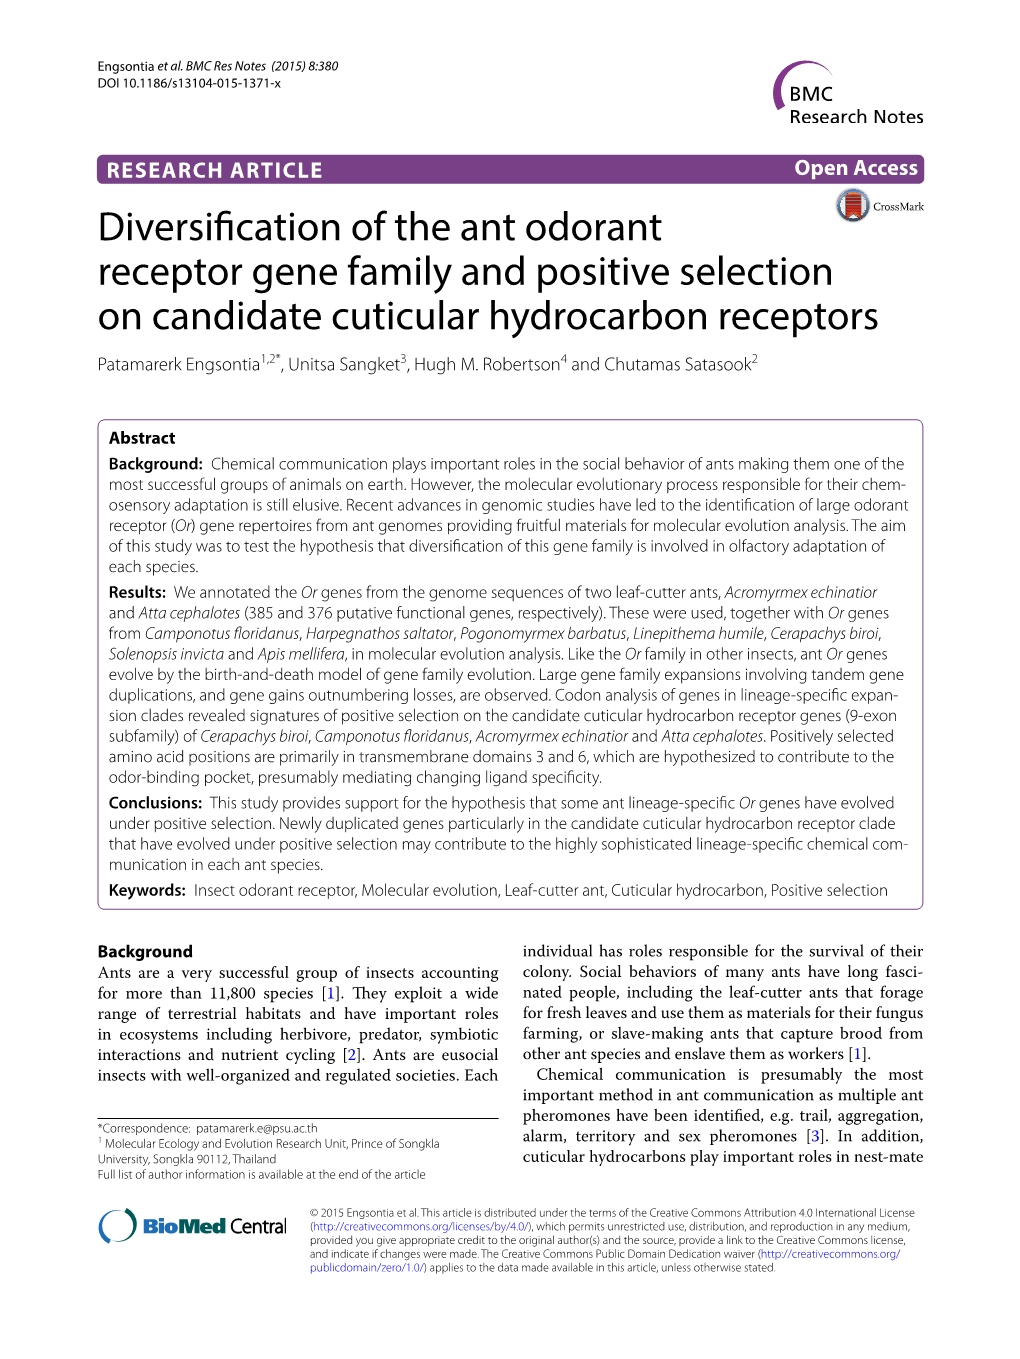 Diversification of the Ant Odorant Receptor Gene Family and Positive